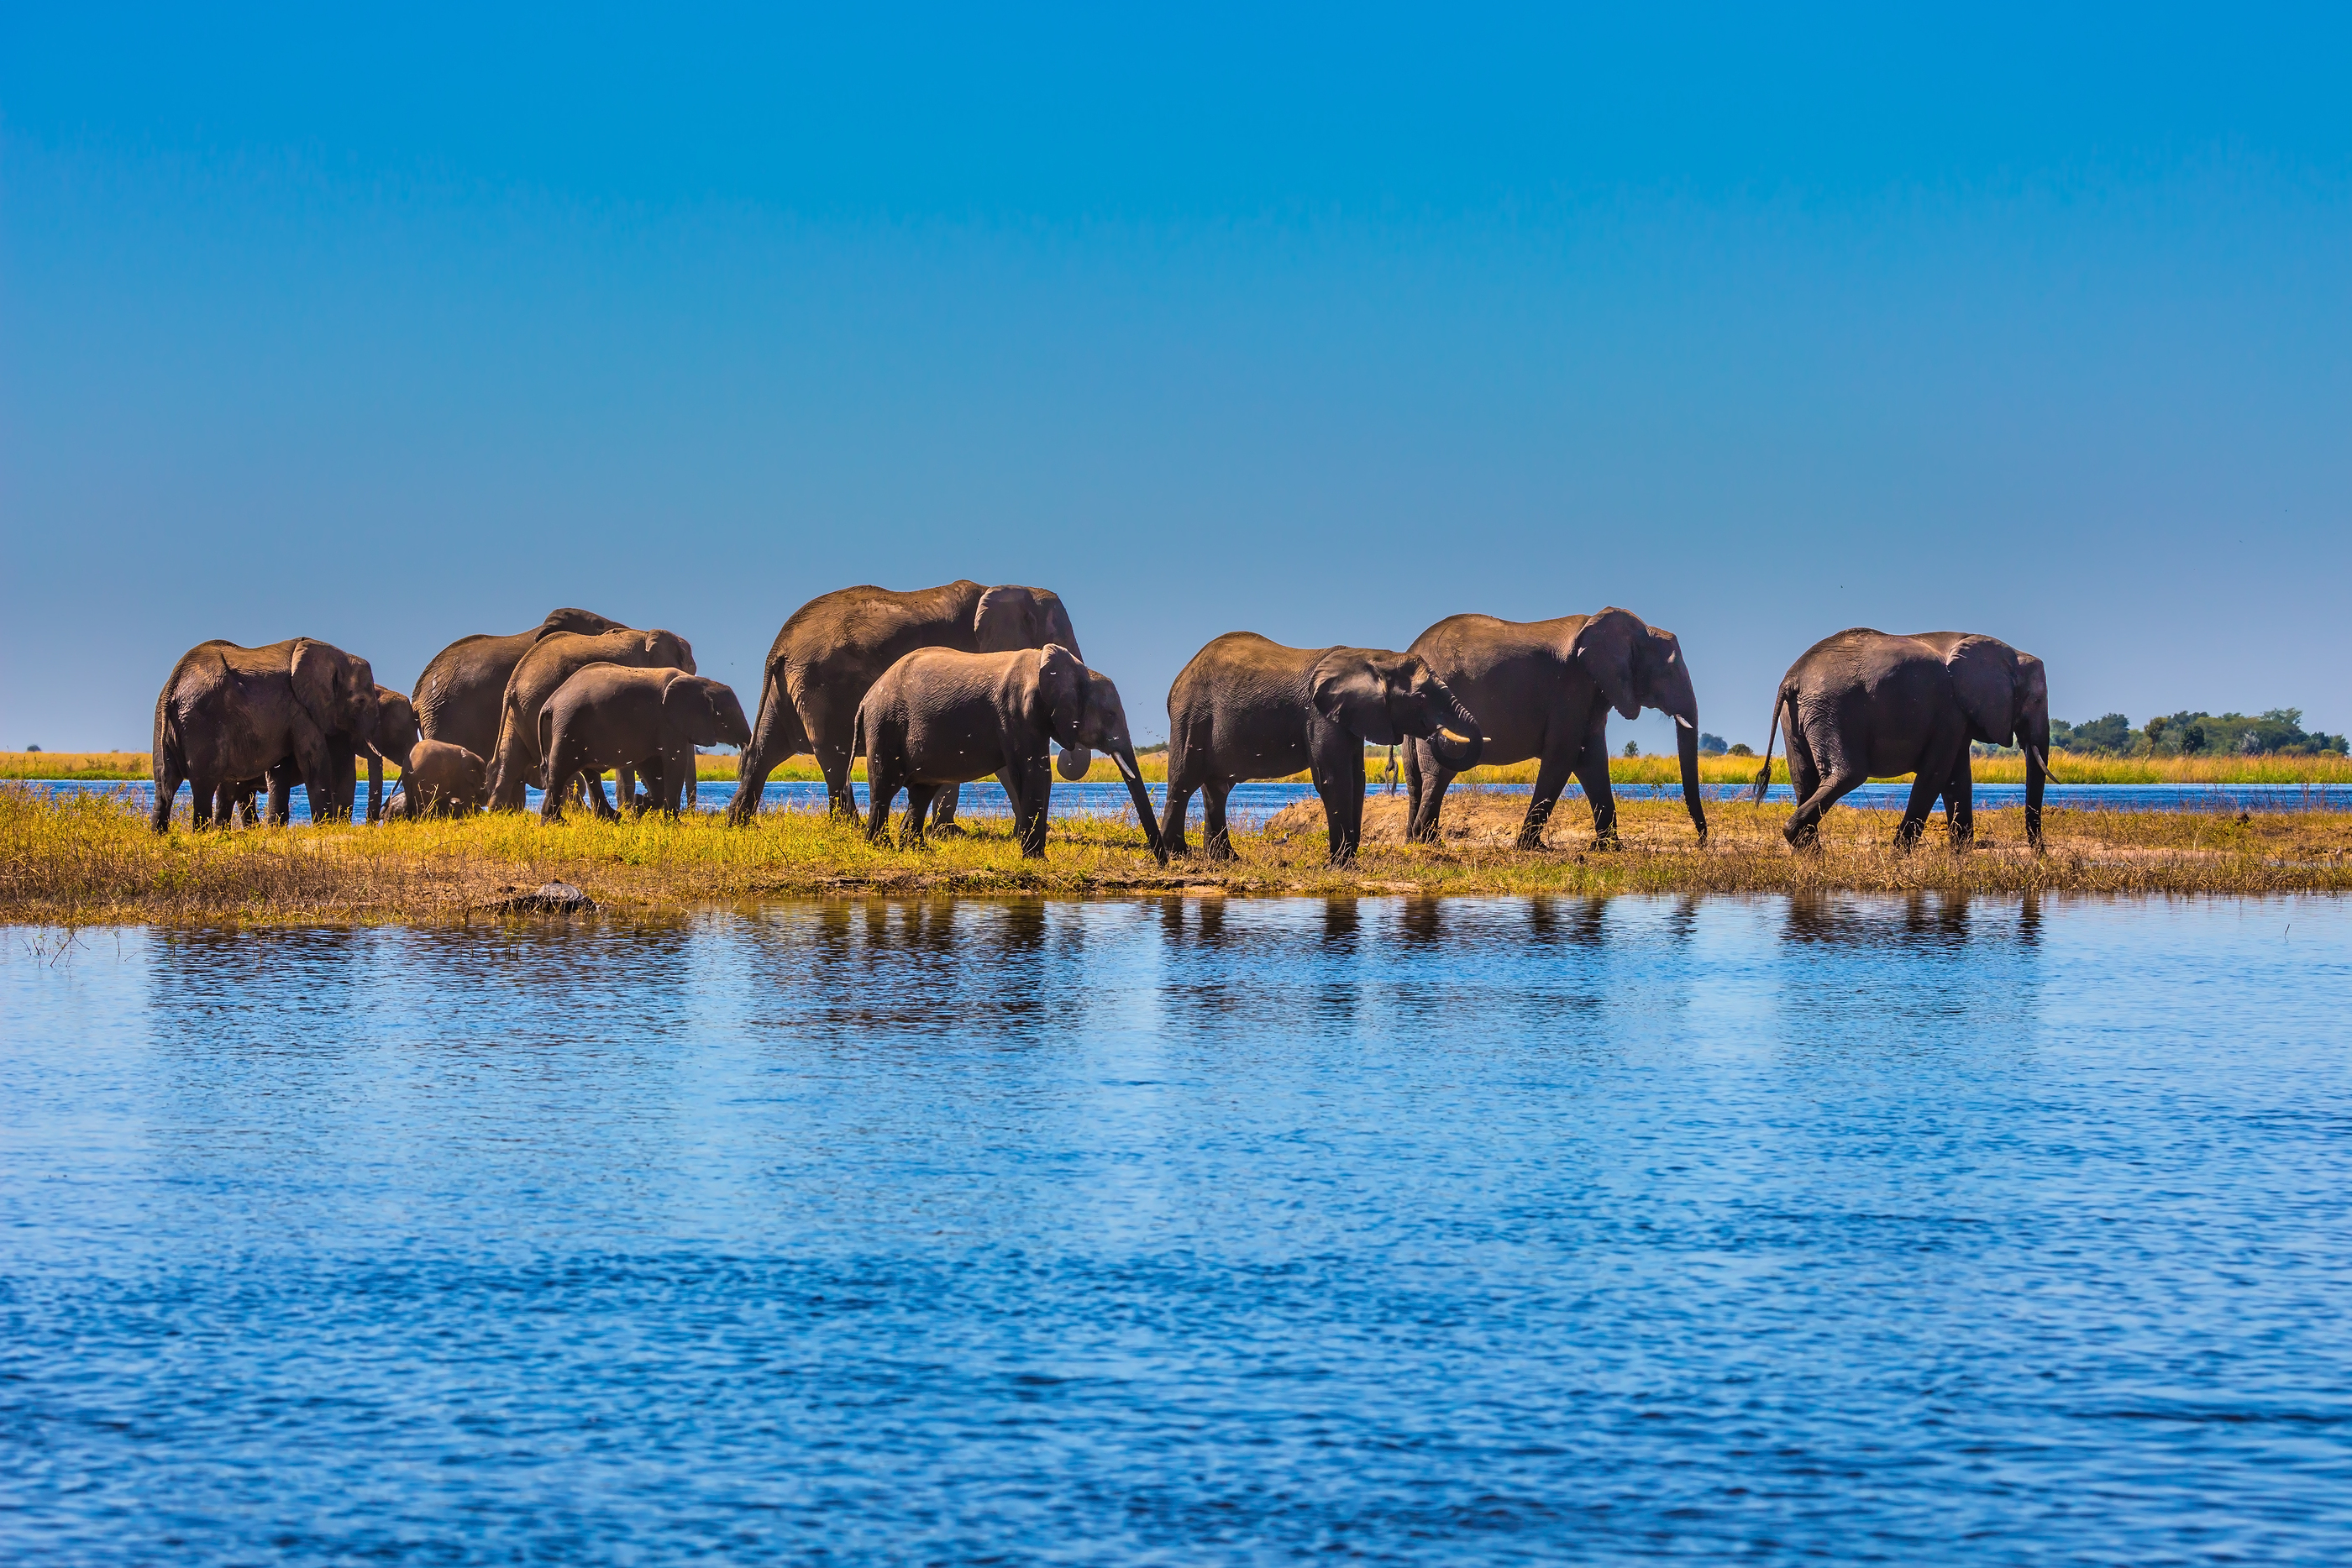 Chobe National Park Is The Oldest National Park In